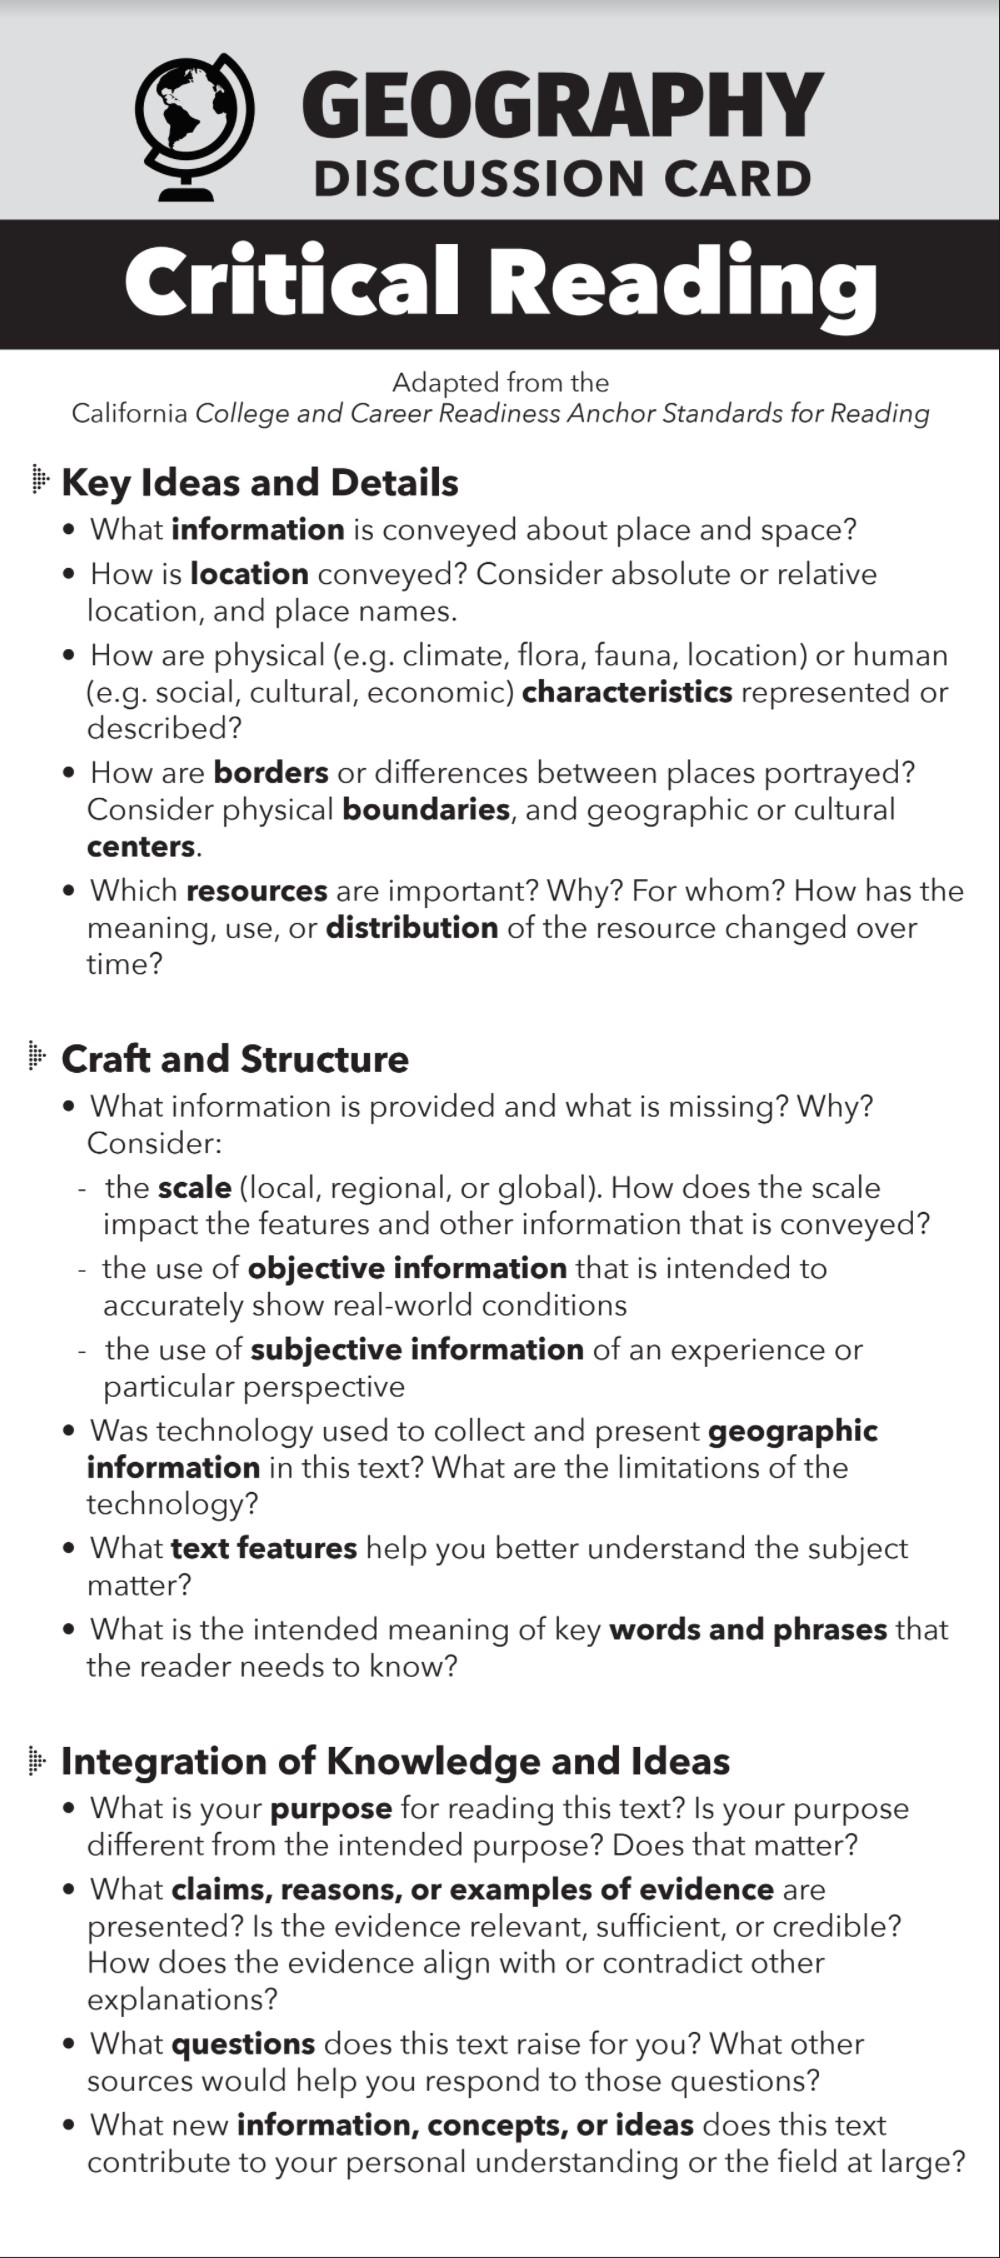 This image shows the Critical Reading side of the Geography Discussion Card. This image is the same content available in the link above.